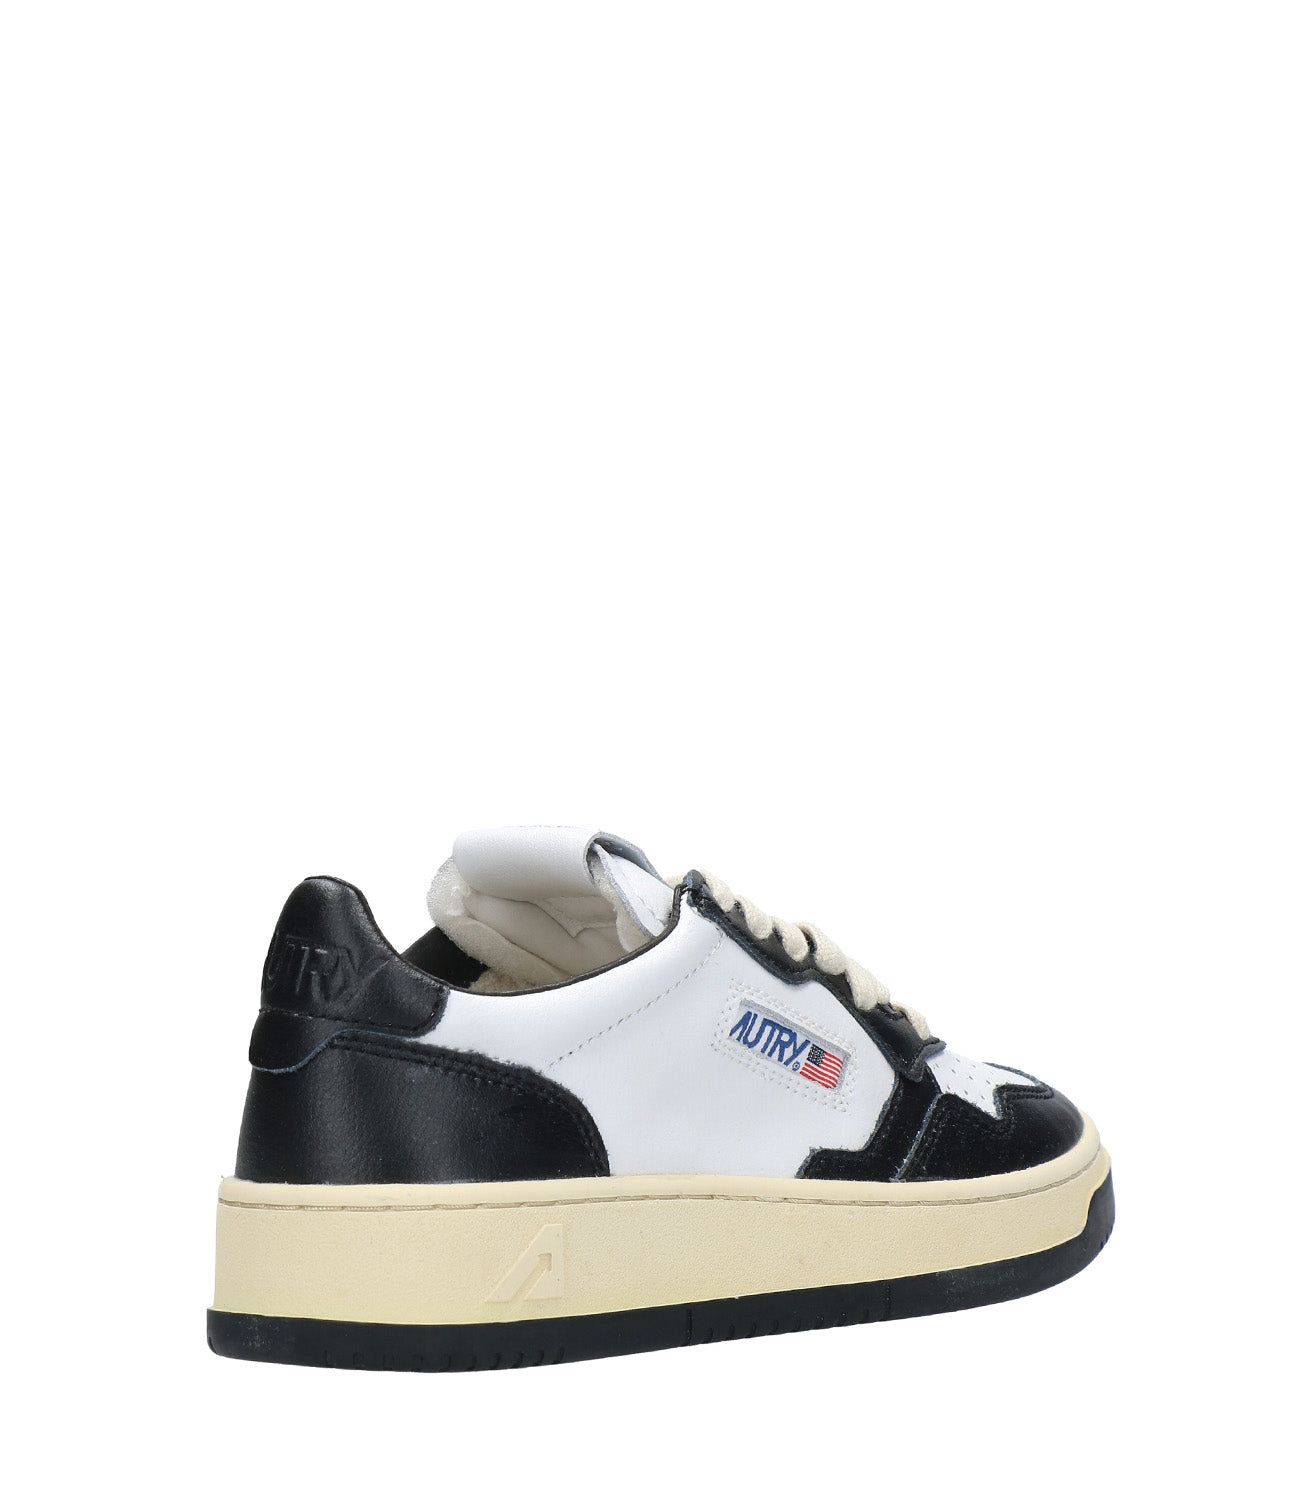 Autry | Sneakers Medalist Low Bianca e Nera